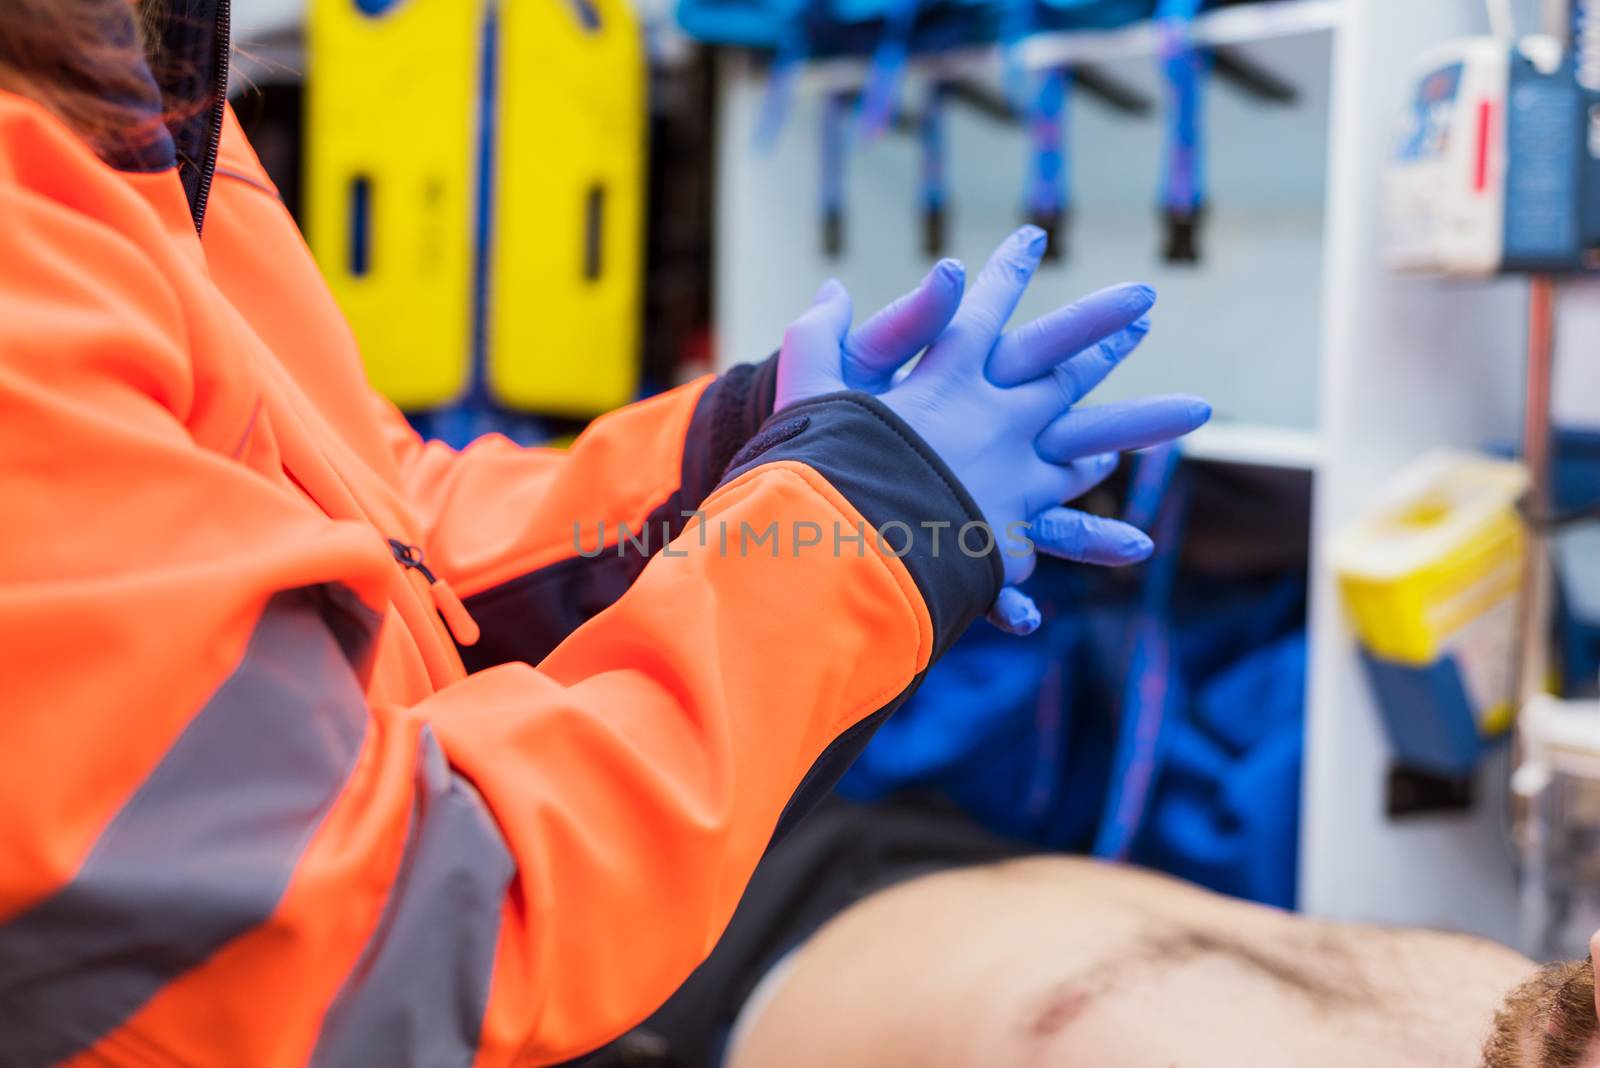 Emergency doctor putting on gloves in ambulance